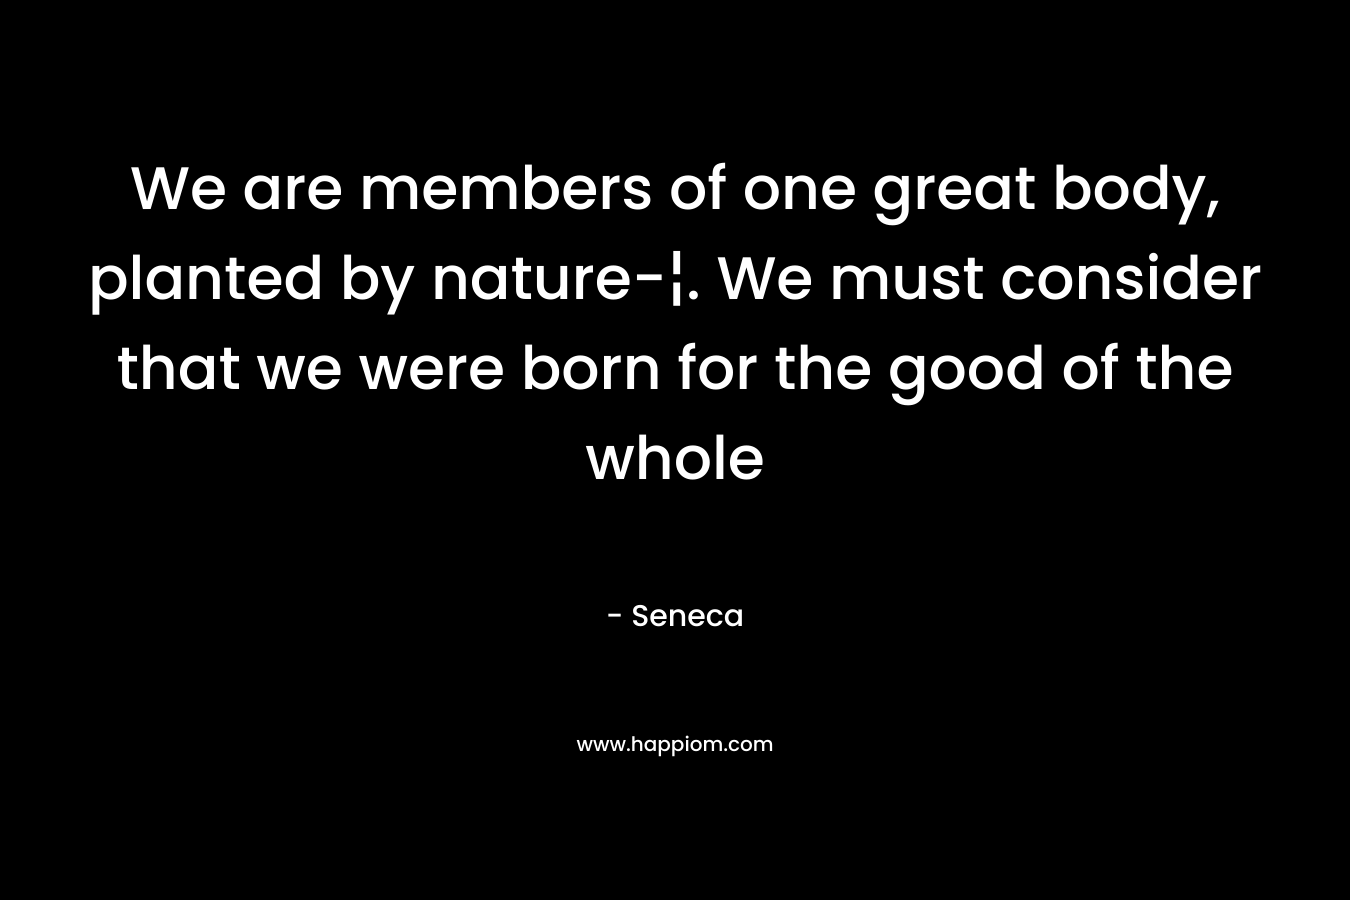 We are members of one great body, planted by nature-¦. We must consider that we were born for the good of the whole – Seneca